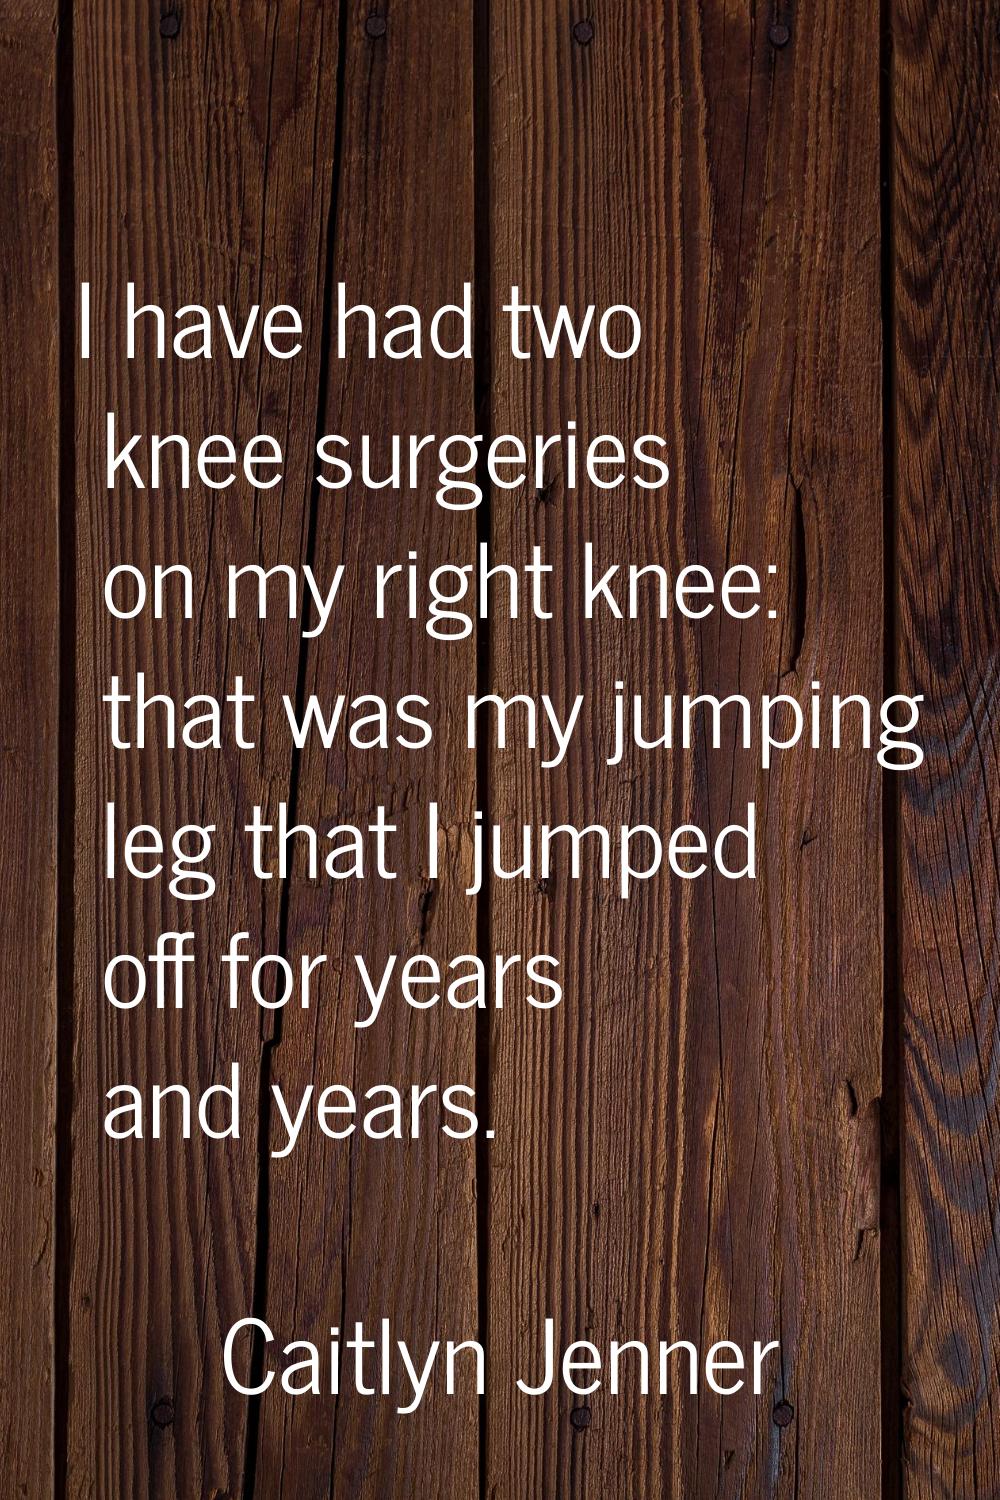 I have had two knee surgeries on my right knee: that was my jumping leg that I jumped off for years